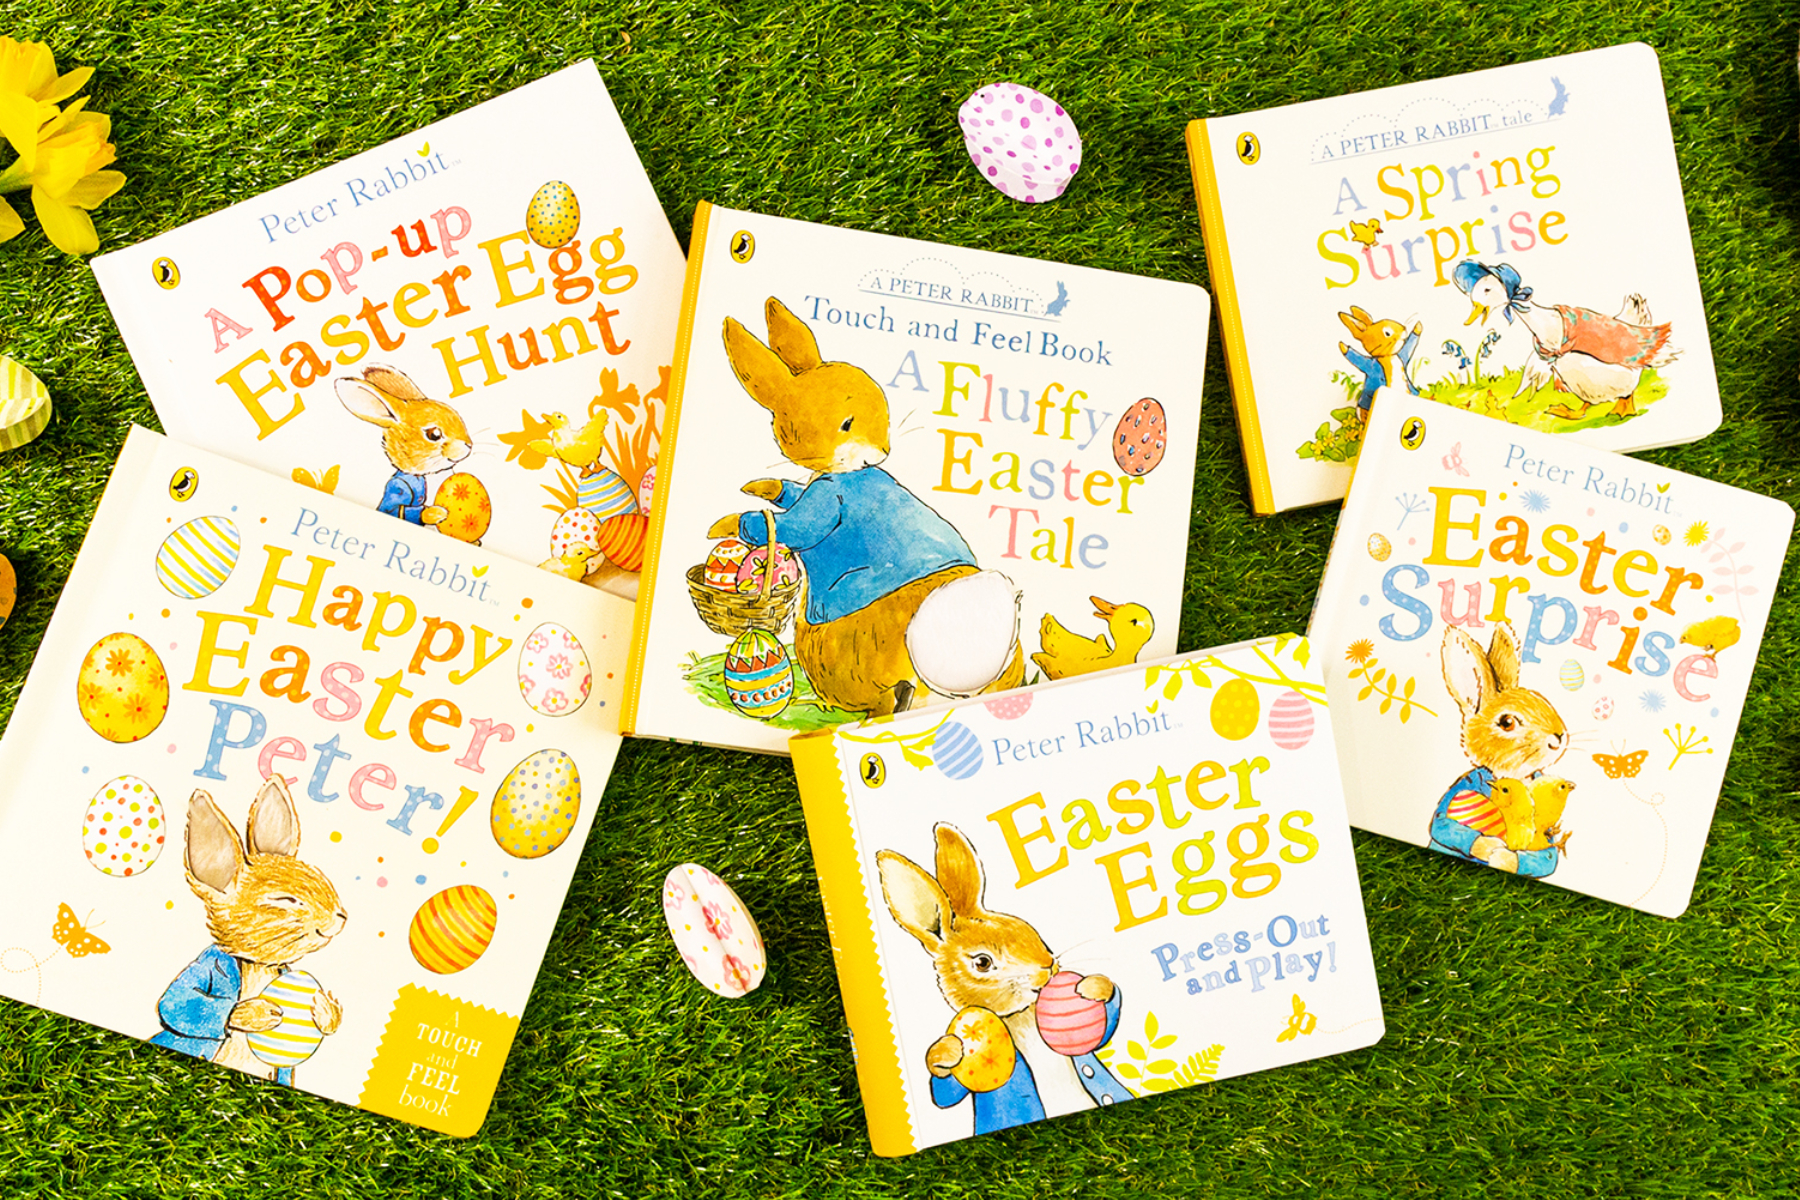 A photo of a selection of Peter Rabbit books on a grassy background